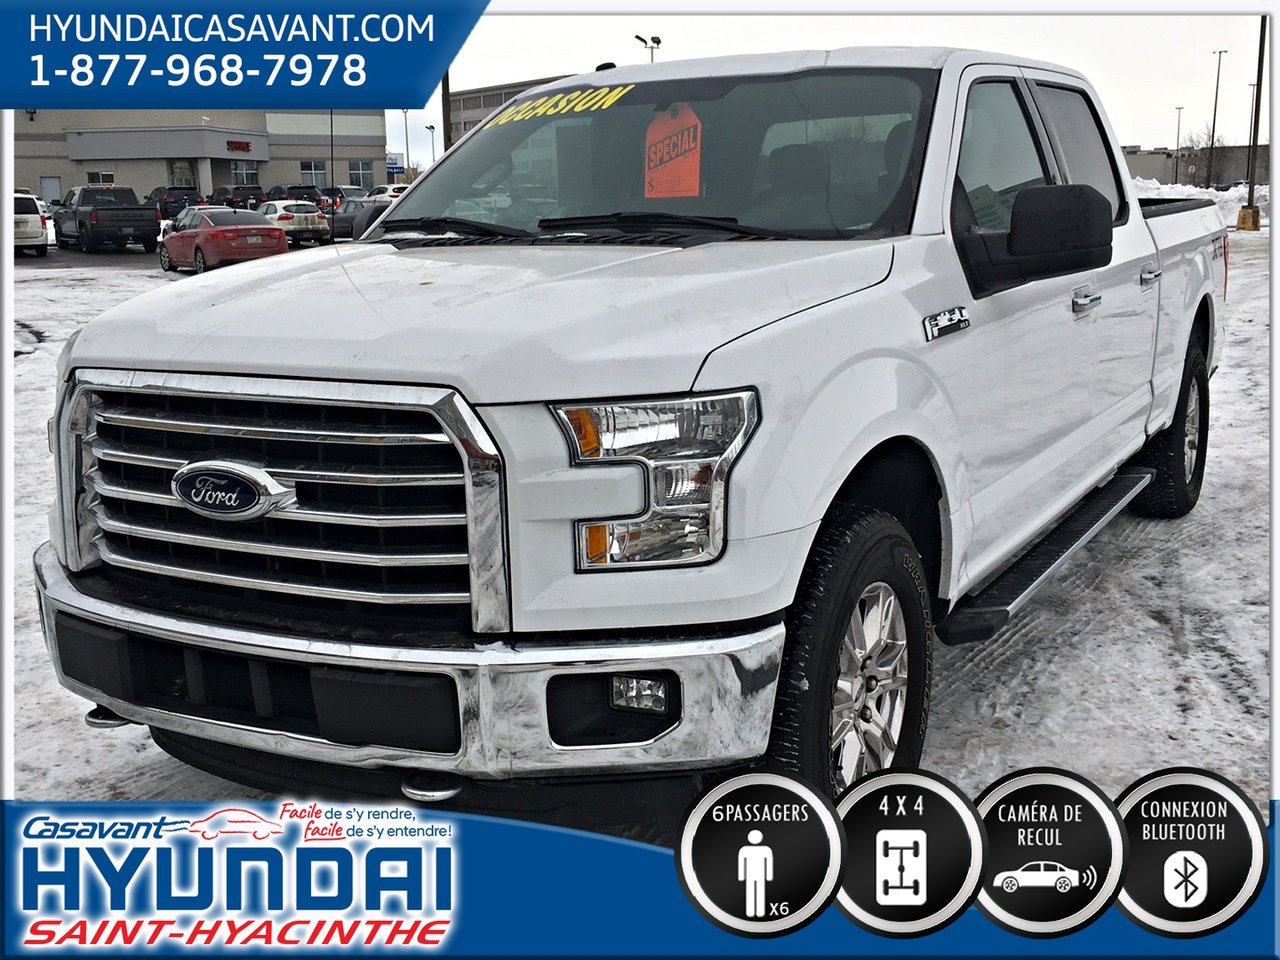  Ford F-150 XTR AWD 6 PASSAGERS